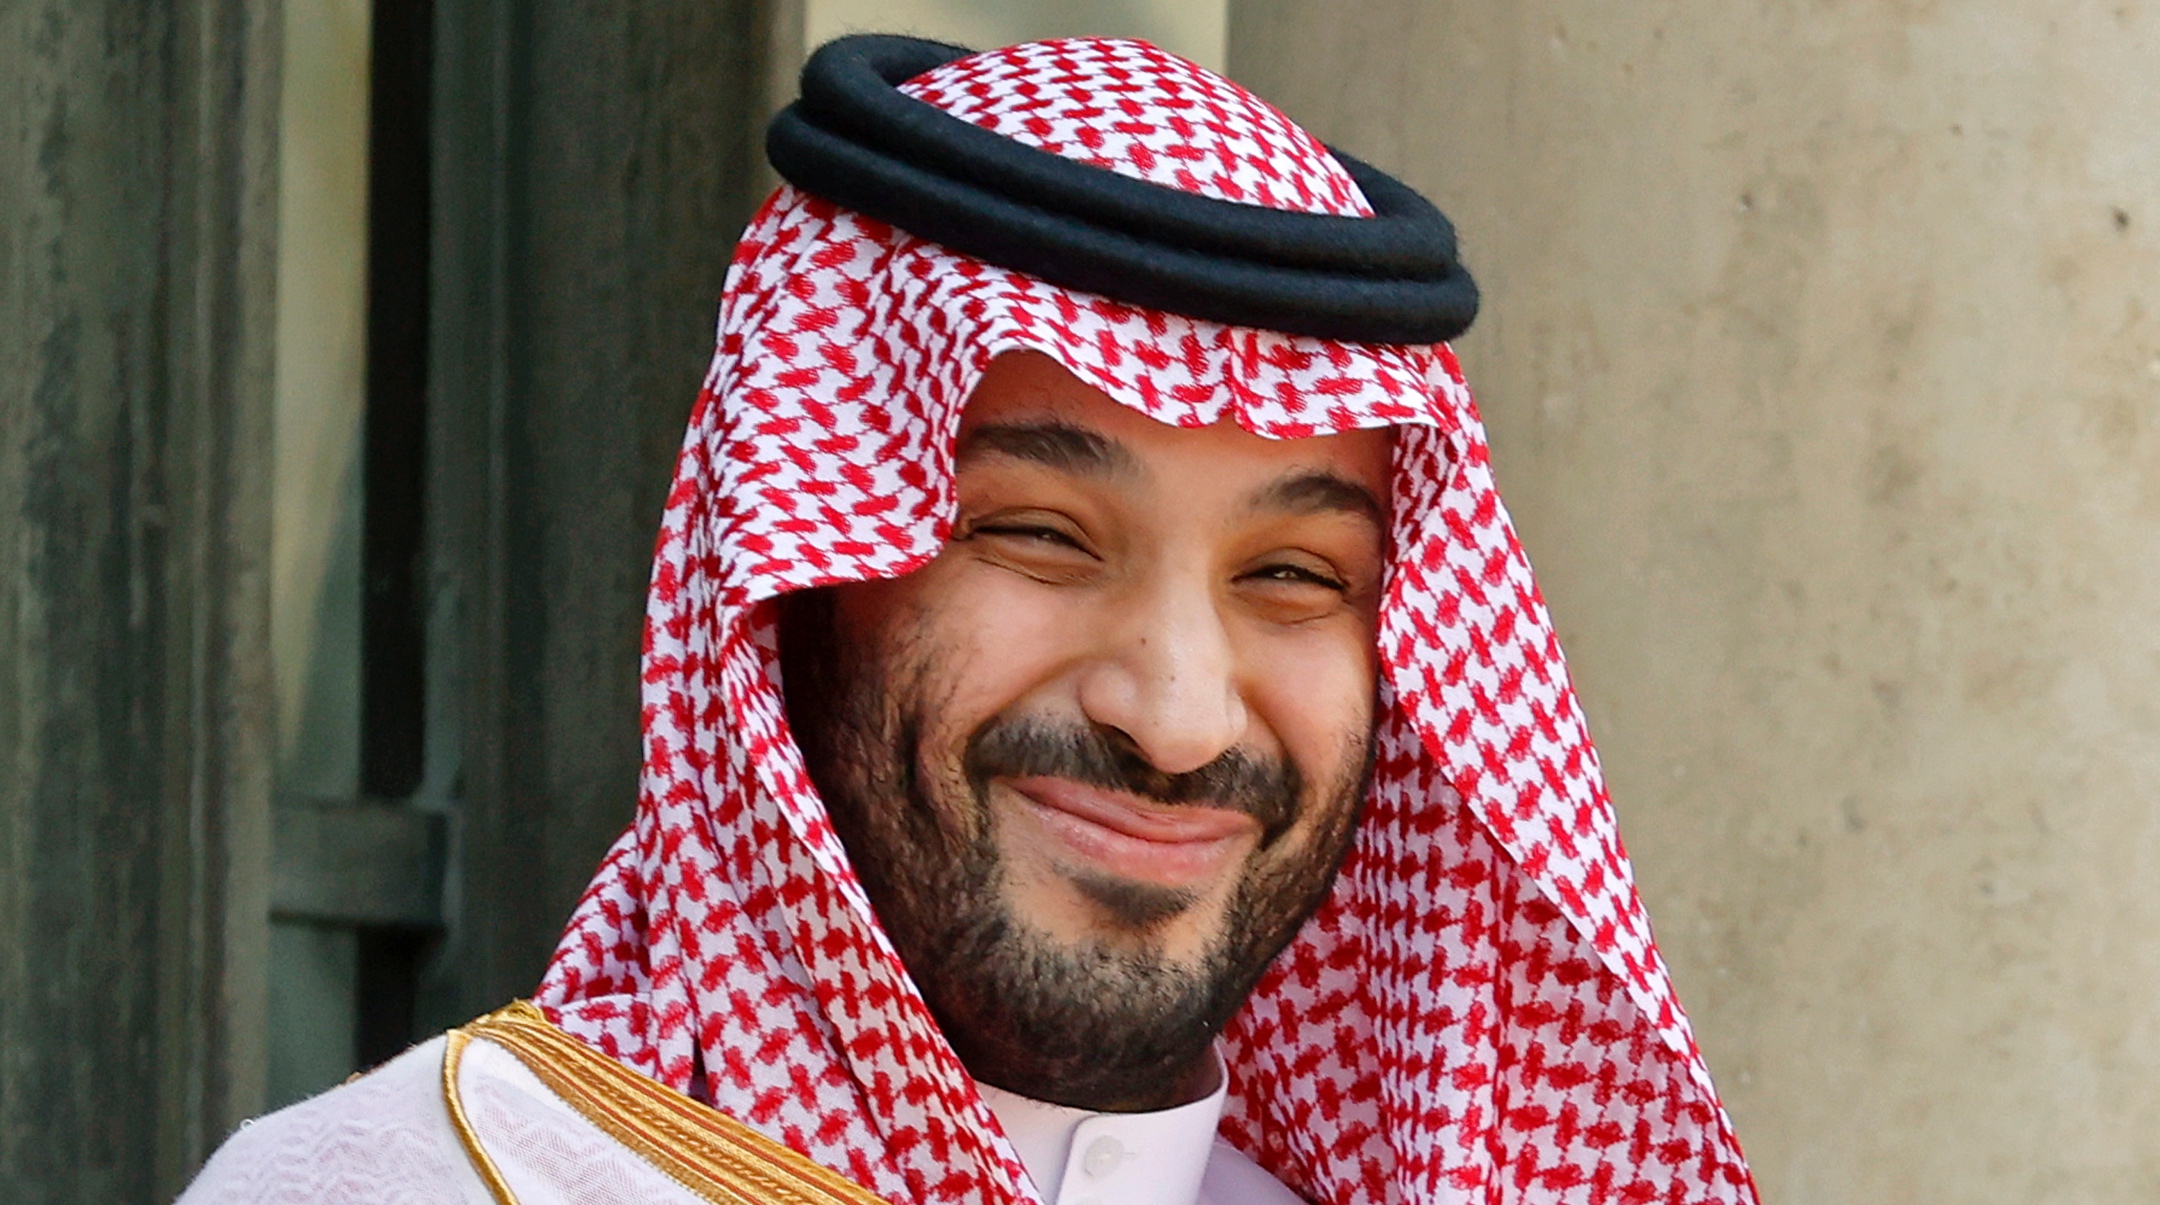 Saudi Arabia’s Crown Prince Mohammed bin Salman (MBS) poses prior to a working lunch with French President Emmanuel Macron at the Elysee Presidential Palace, June 16, 2023. (Chesnot/Getty Images)